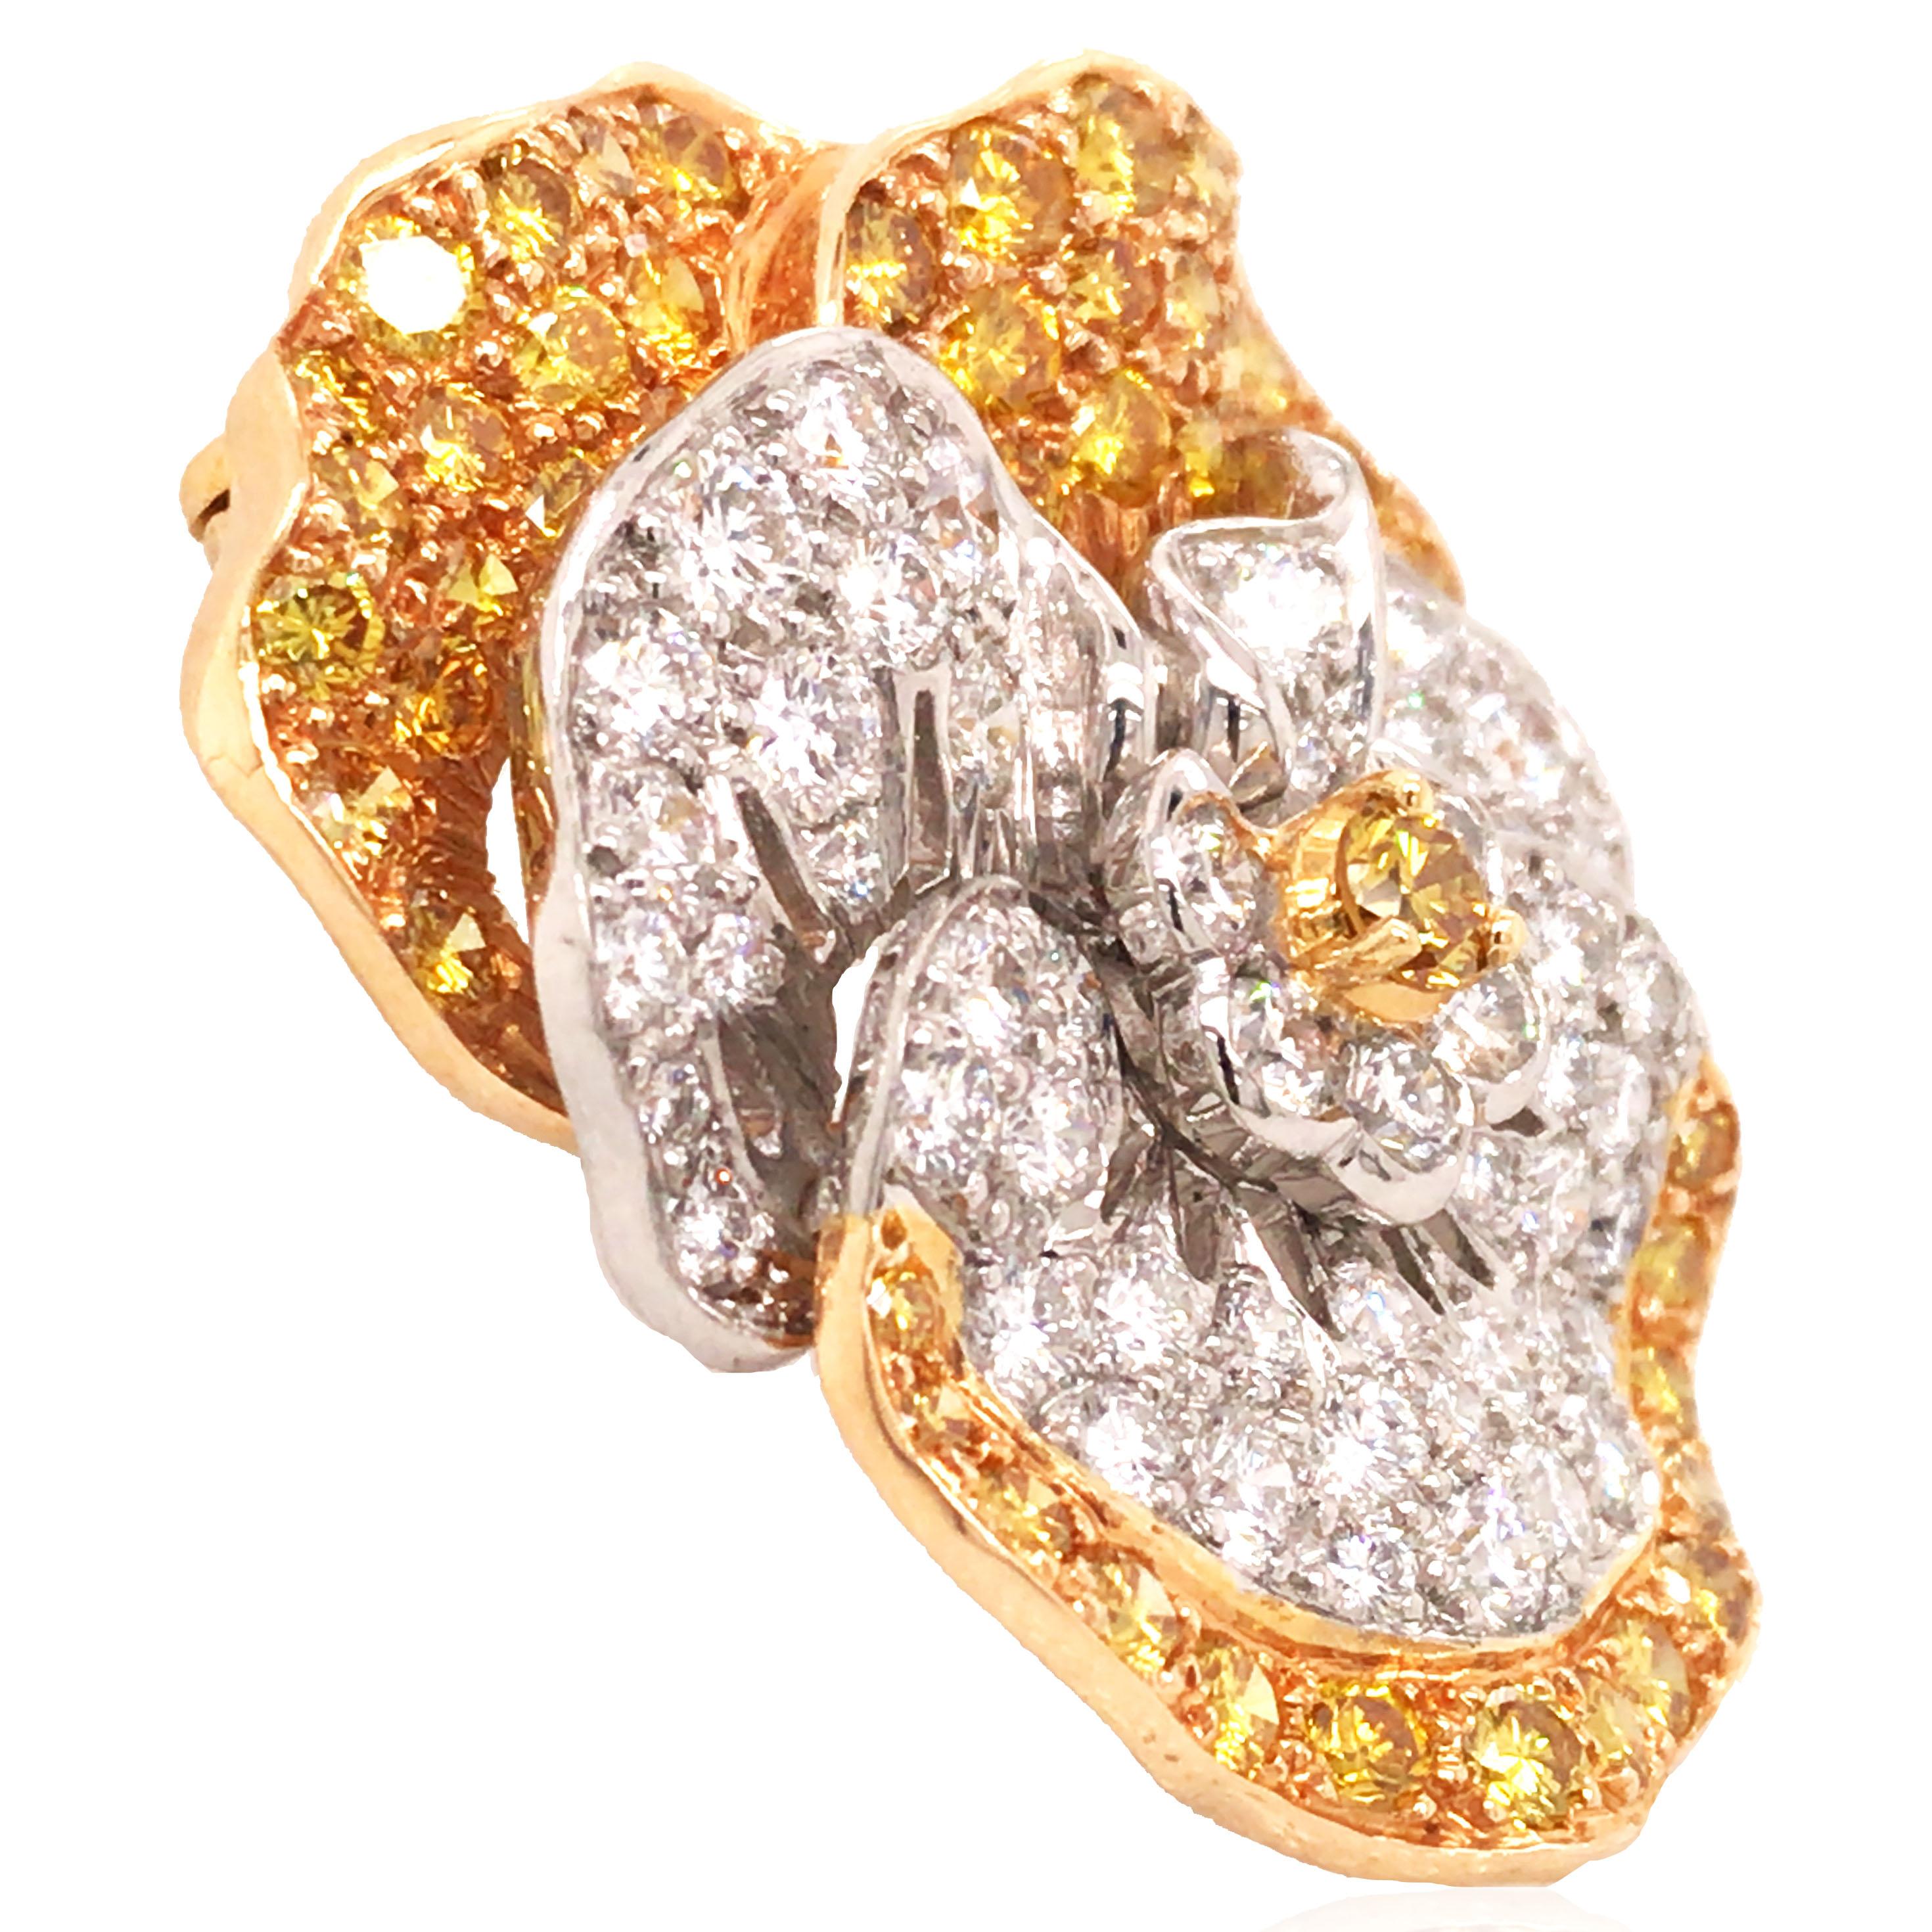 It contains 60 round diamond 2.71 ct and 57 round fancy color yellow diamond 2.89 ct.

Stamp: 